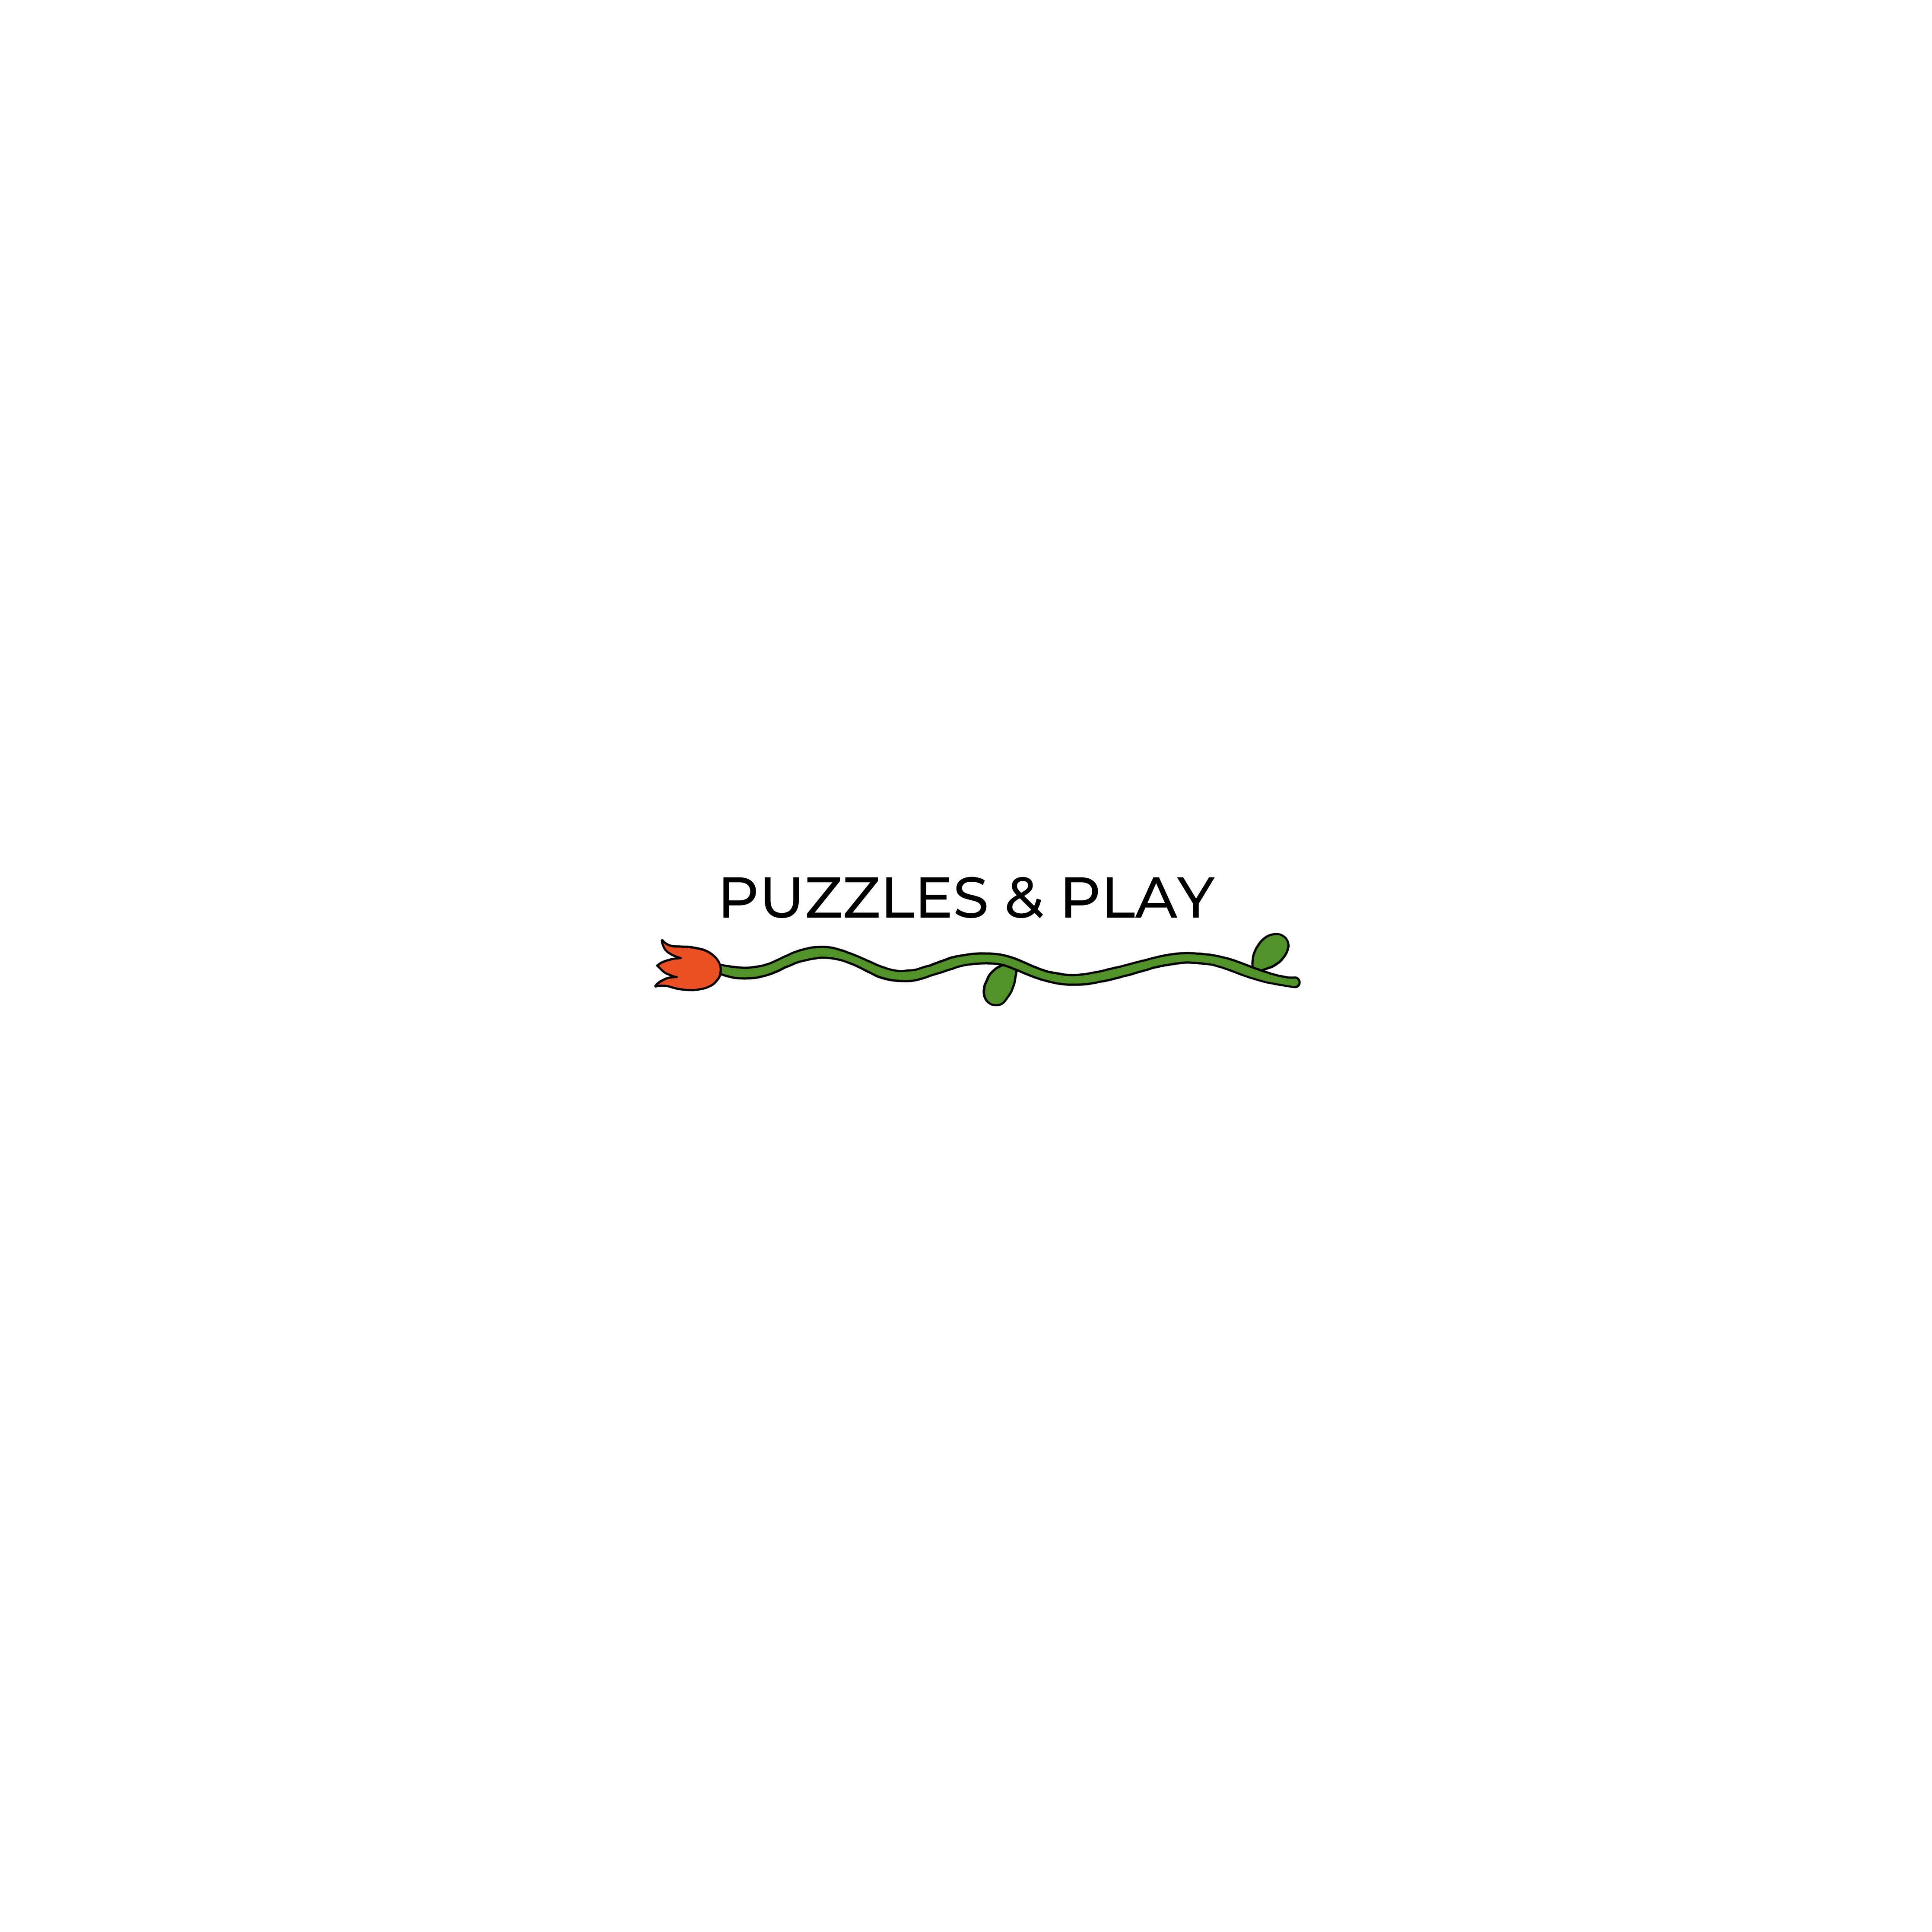 PUZZLES & PLAY